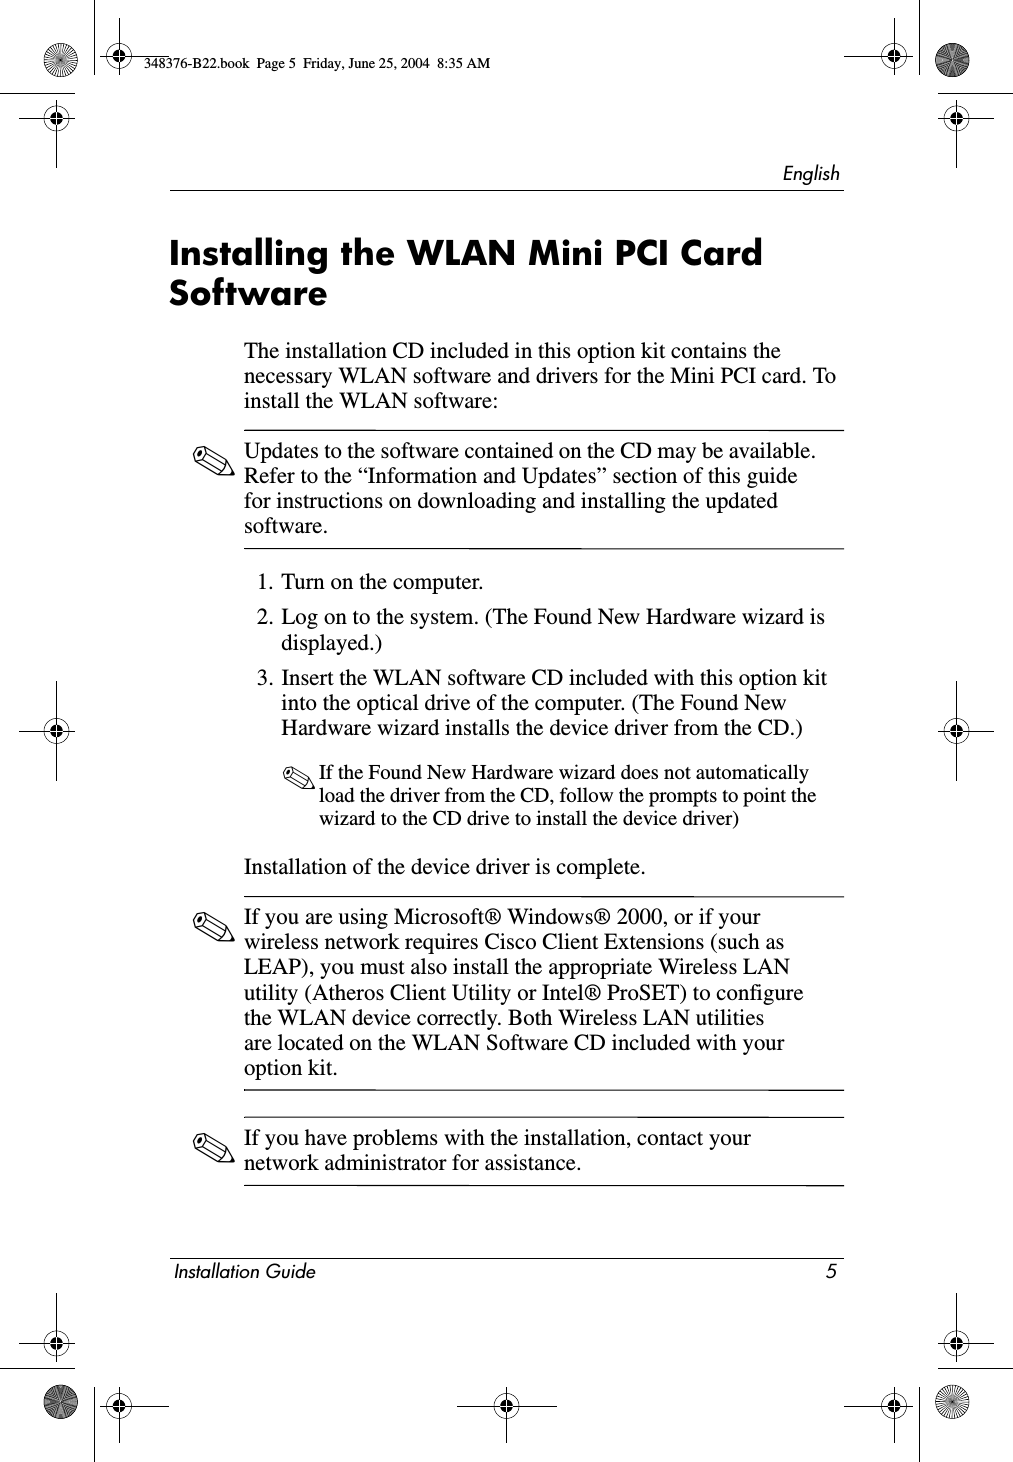 EnglishInstallation Guide 5Installing the WLAN Mini PCI Card SoftwareThe installation CD included in this option kit contains the necessary WLAN software and drivers for the Mini PCI card. To install the WLAN software: ✎Updates to the software contained on the CD may be available. Refer to the “Information and Updates” section of this guide for instructions on downloading and installing the updated software.1. Turn on the computer.2. Log on to the system. (The Found New Hardware wizard is displayed.)3. Insert the WLAN software CD included with this option kit into the optical drive of the computer. (The Found New Hardware wizard installs the device driver from the CD.)✎If the Found New Hardware wizard does not automatically load the driver from the CD, follow the prompts to point the wizard to the CD drive to install the device driver)Installation of the device driver is complete.✎If you are using Microsoft® Windows® 2000, or if your wireless network requires Cisco Client Extensions (such as LEAP), you must also install the appropriate Wireless LAN utility (Atheros Client Utility or Intel® ProSET) to configure the WLAN device correctly. Both Wireless LAN utilities are located on the WLAN Software CD included with your option kit. ✎If you have problems with the installation, contact your network administrator for assistance.348376-B22.book  Page 5  Friday, June 25, 2004  8:35 AM